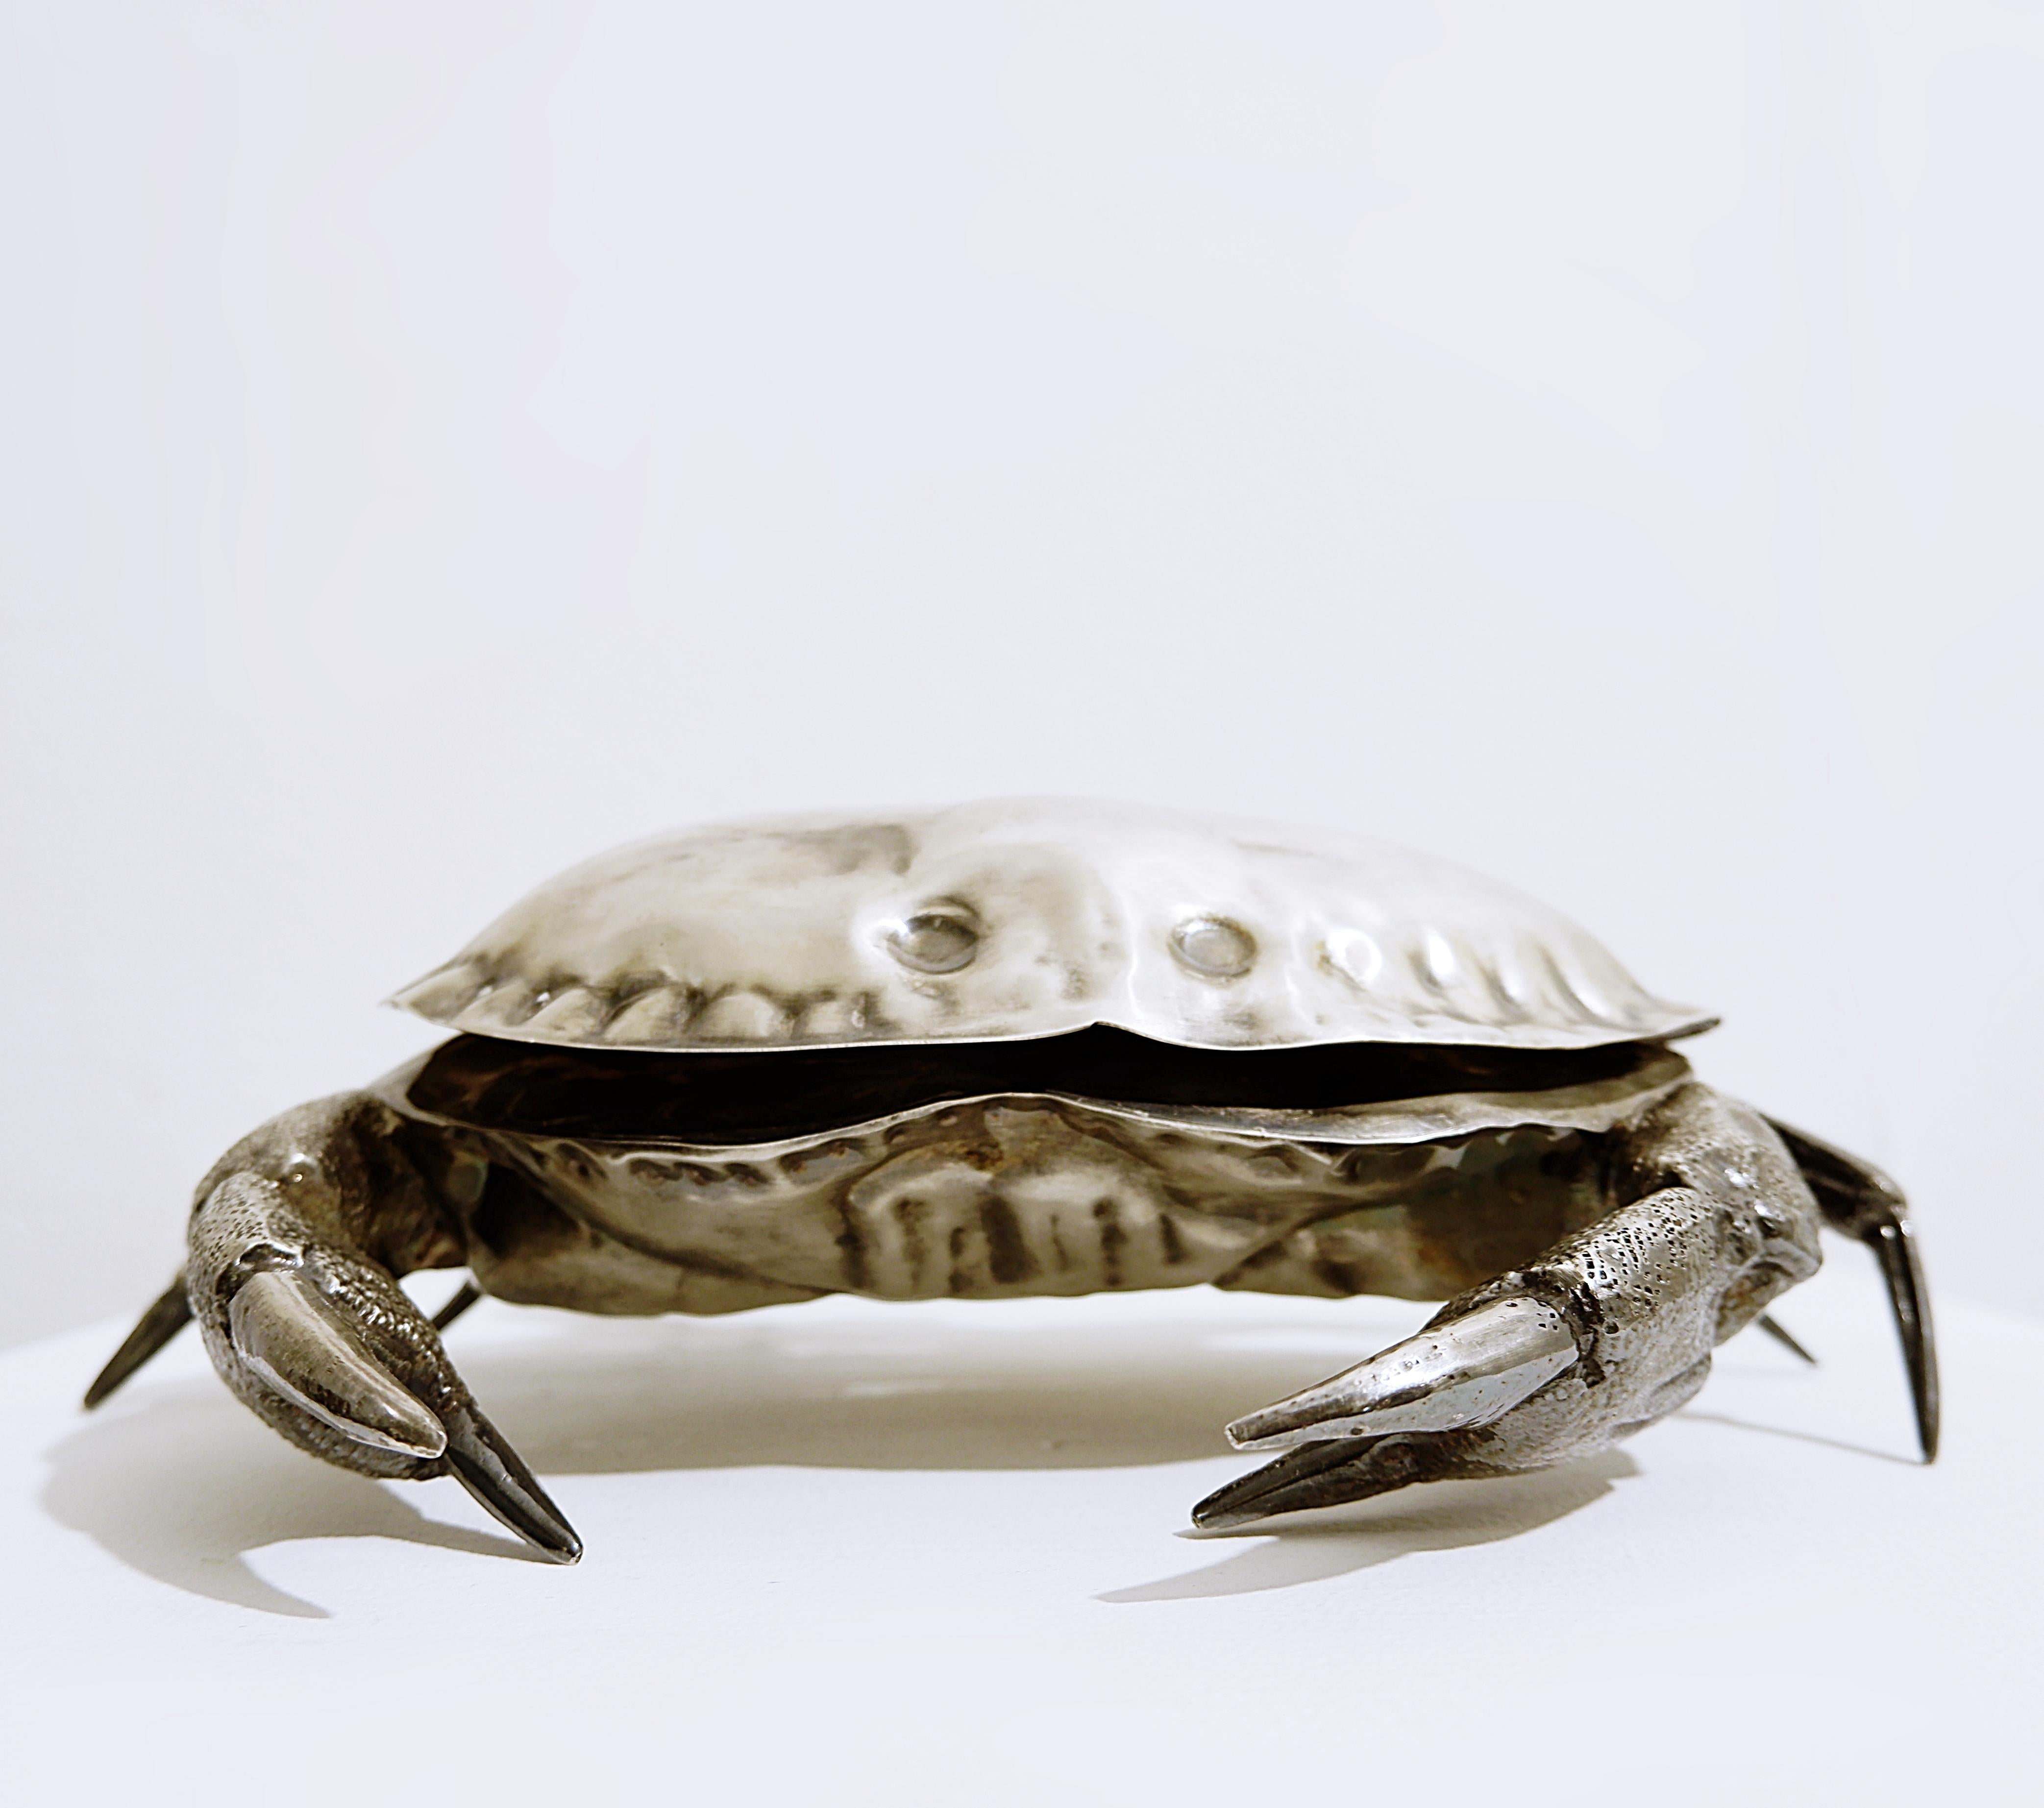 Crab Caviar cup in silver plate - Spain, 1970s.